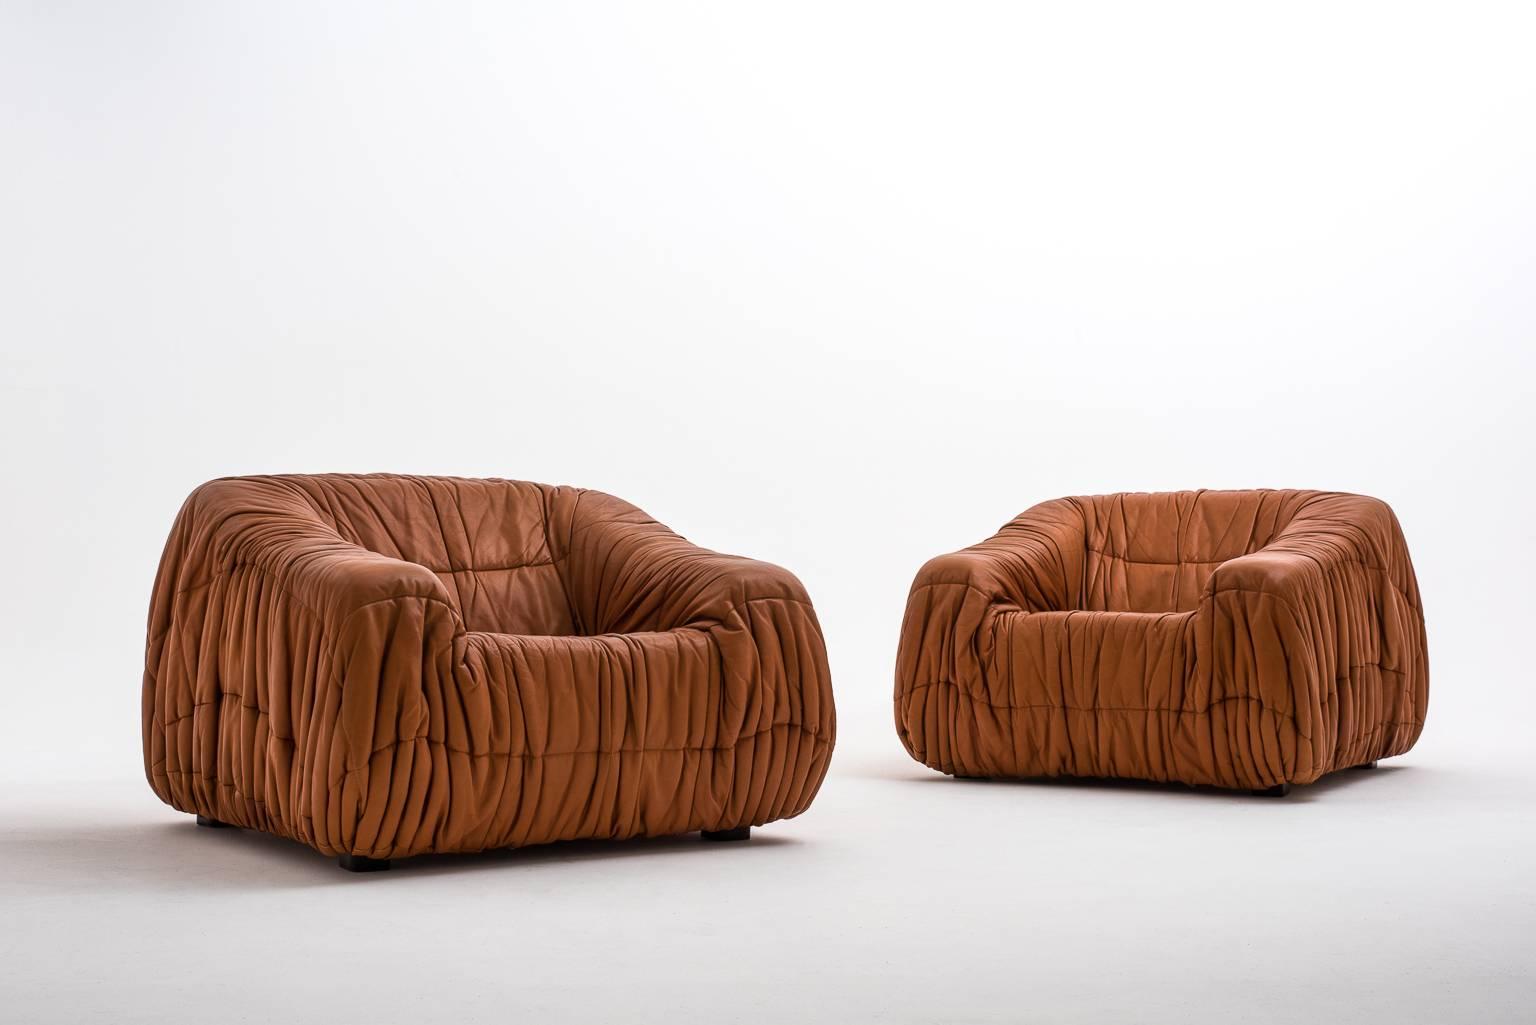 Distinctive 'Piumino' lounge chairs by Jonathan de Pas, Donato D'urbino & Paolo Lomazzi for Dell'Oca, Italy 1970. Fantastic shape completely moulded out of foam and covered with gorgeous cognac colored leather. Extremely comfortable. In excellent